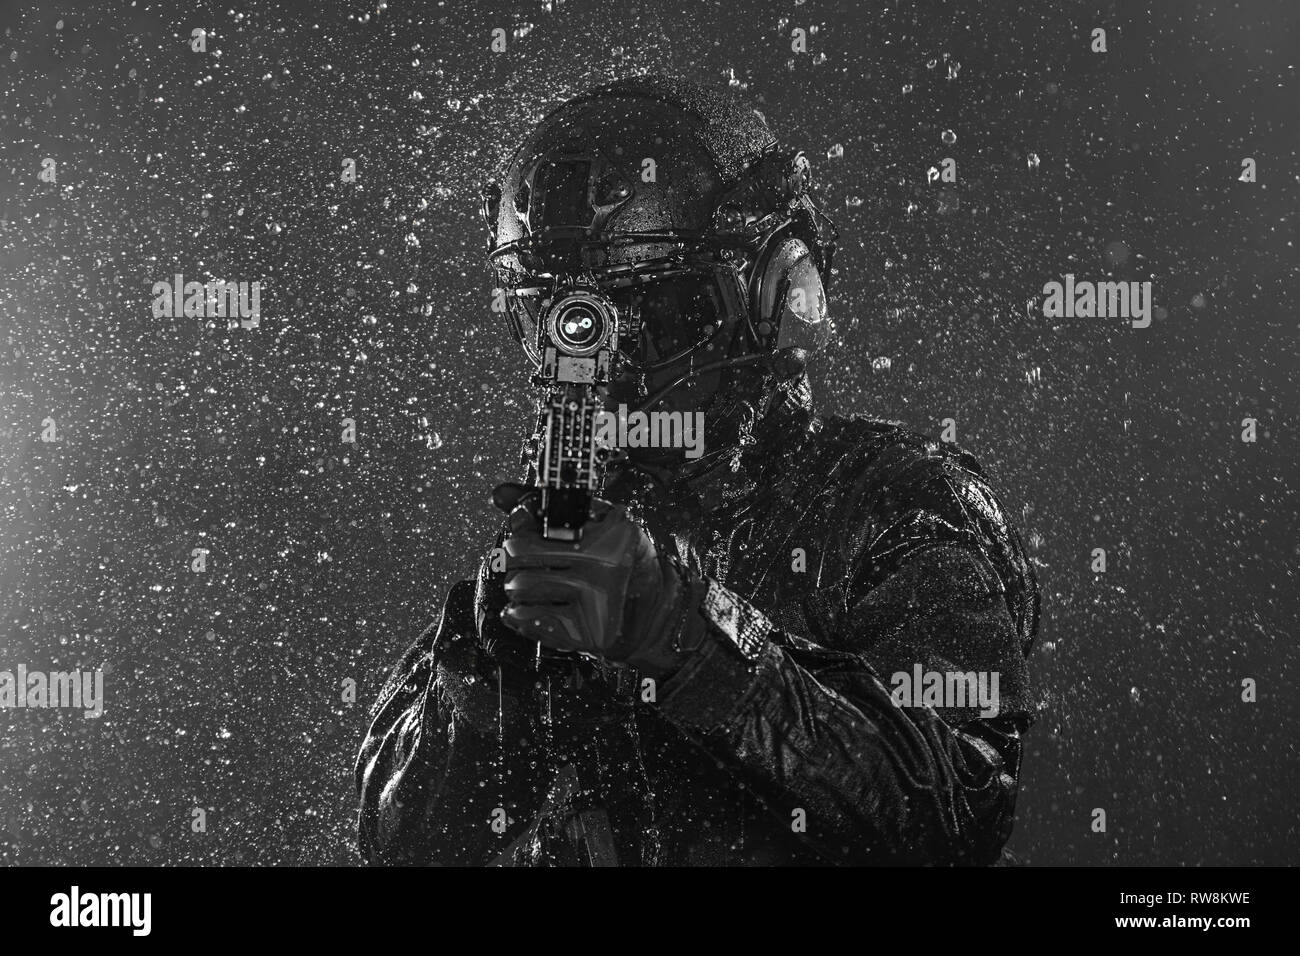 Spec ops police officer SWAT in the rain. Stock Photo